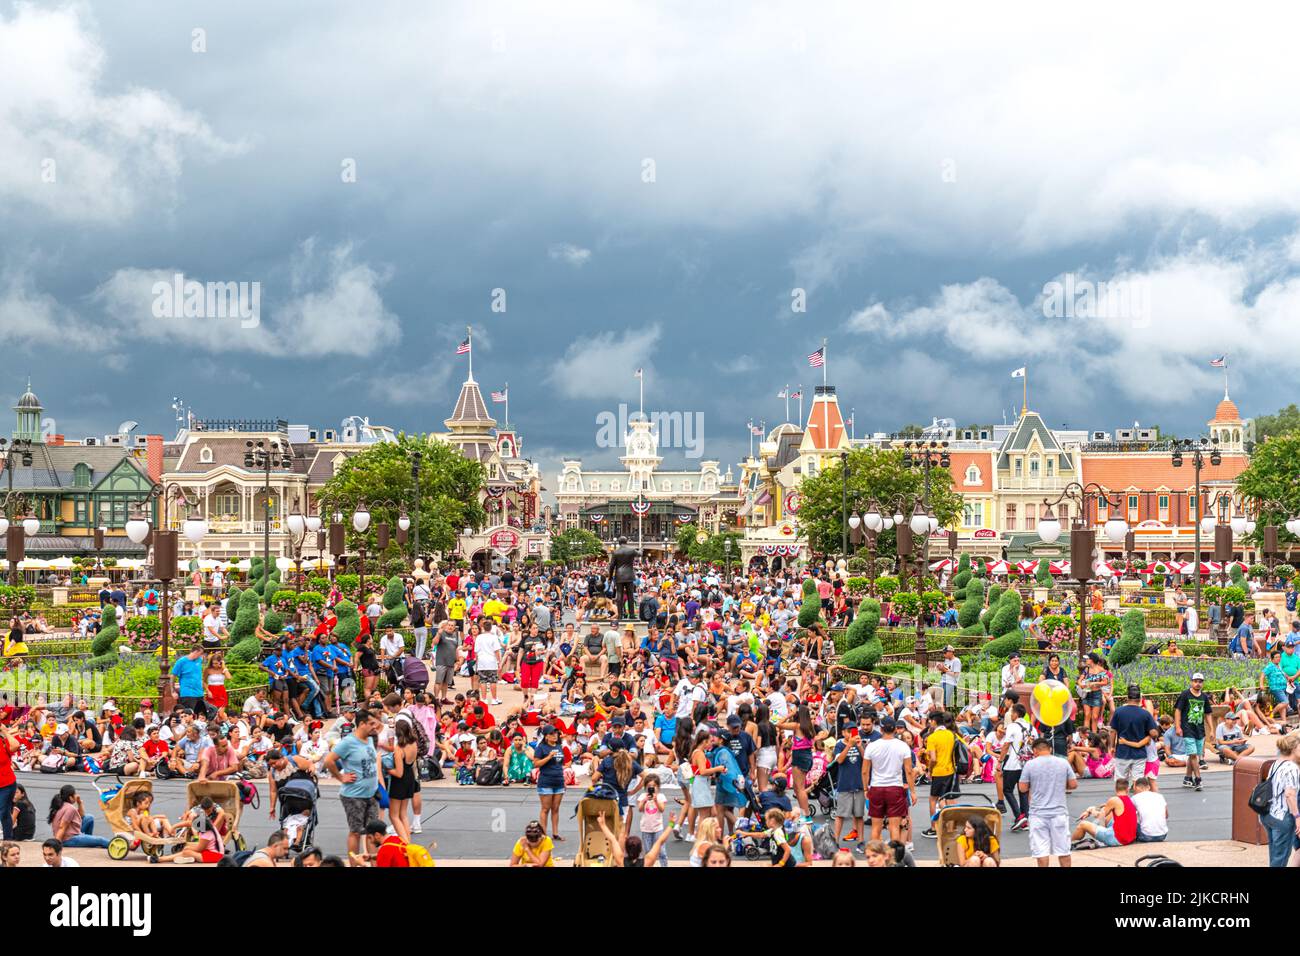 Wide angle of the crowd of people visiting the famous tourist attraction. Stock Photo